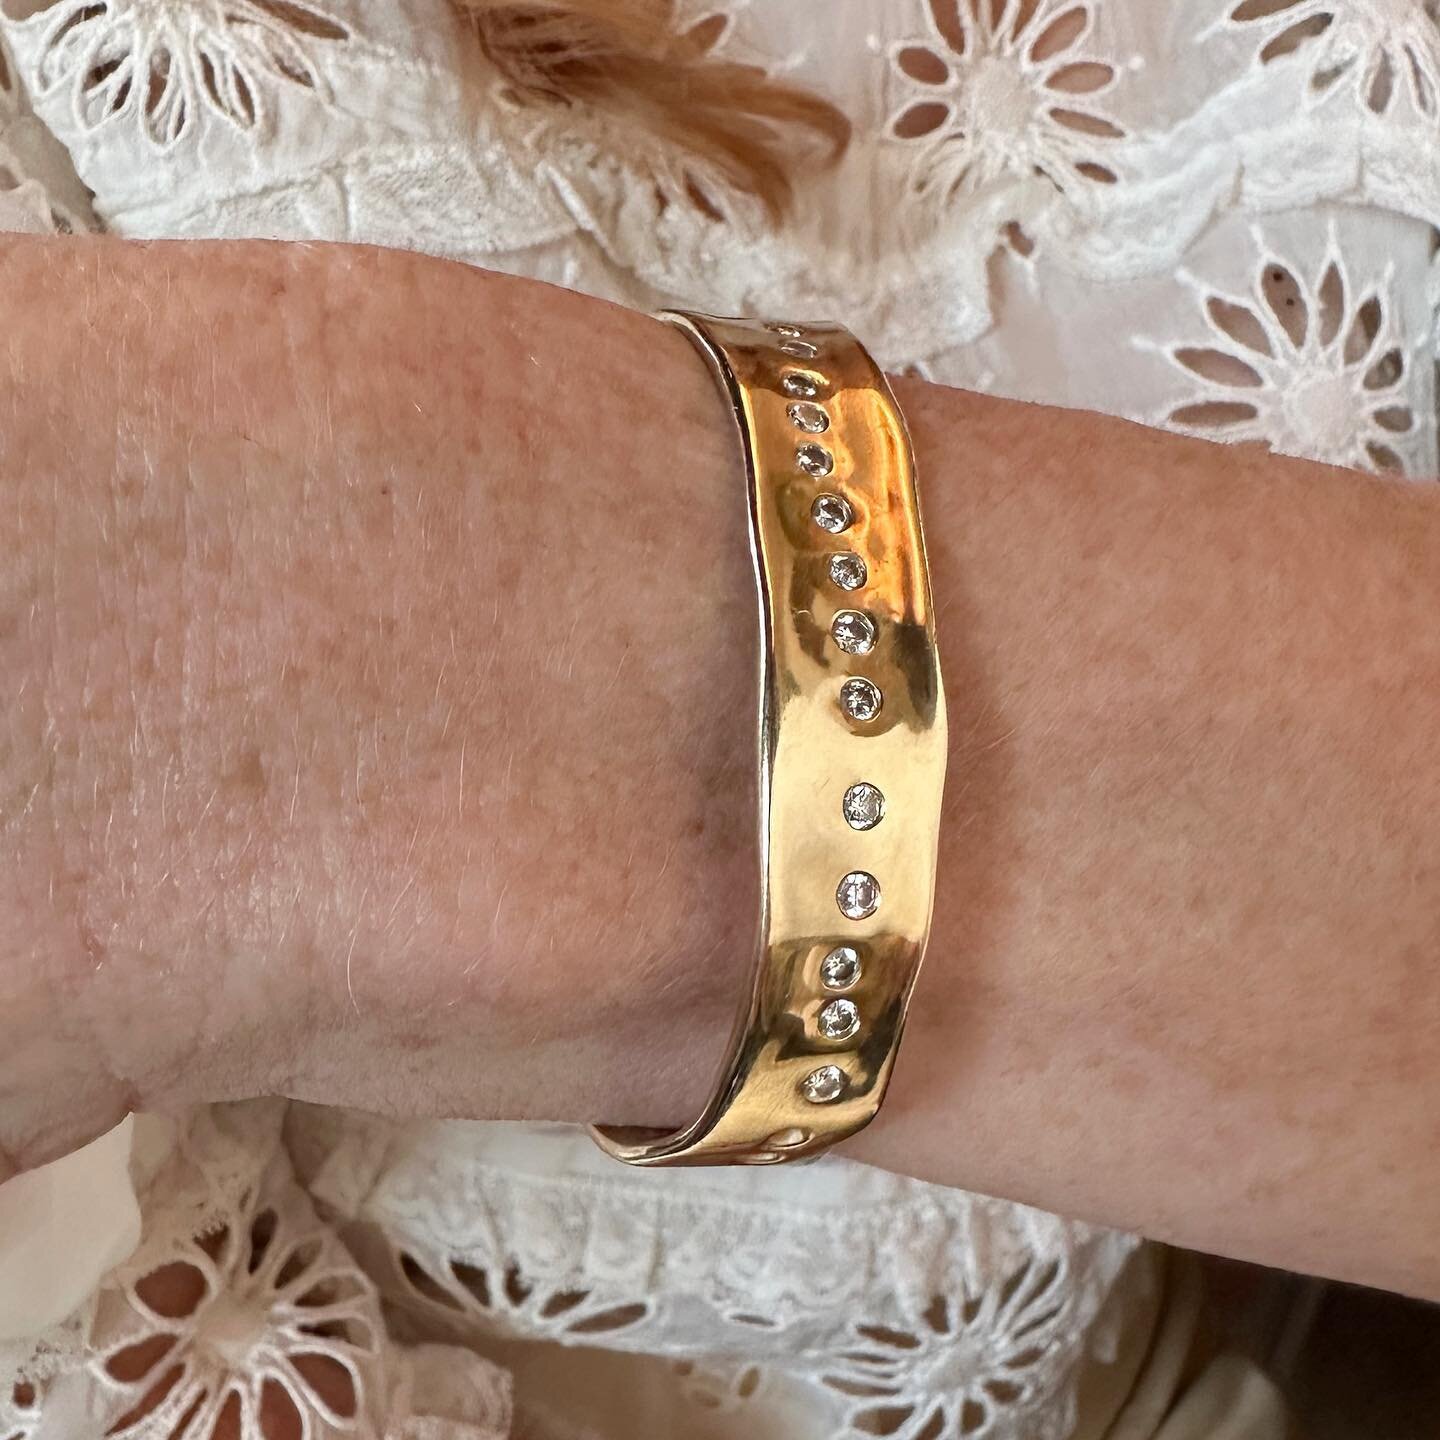 As cool as it gets: spectacular, epic gold and diamond cuff made by Kid Jeweler Nico pre-Covid. 

Some advised at the birth of Kid Jeweler (5 years ago!) that those who can afford fine gold jewelry don&rsquo;t want to invest in jewelry made by their 